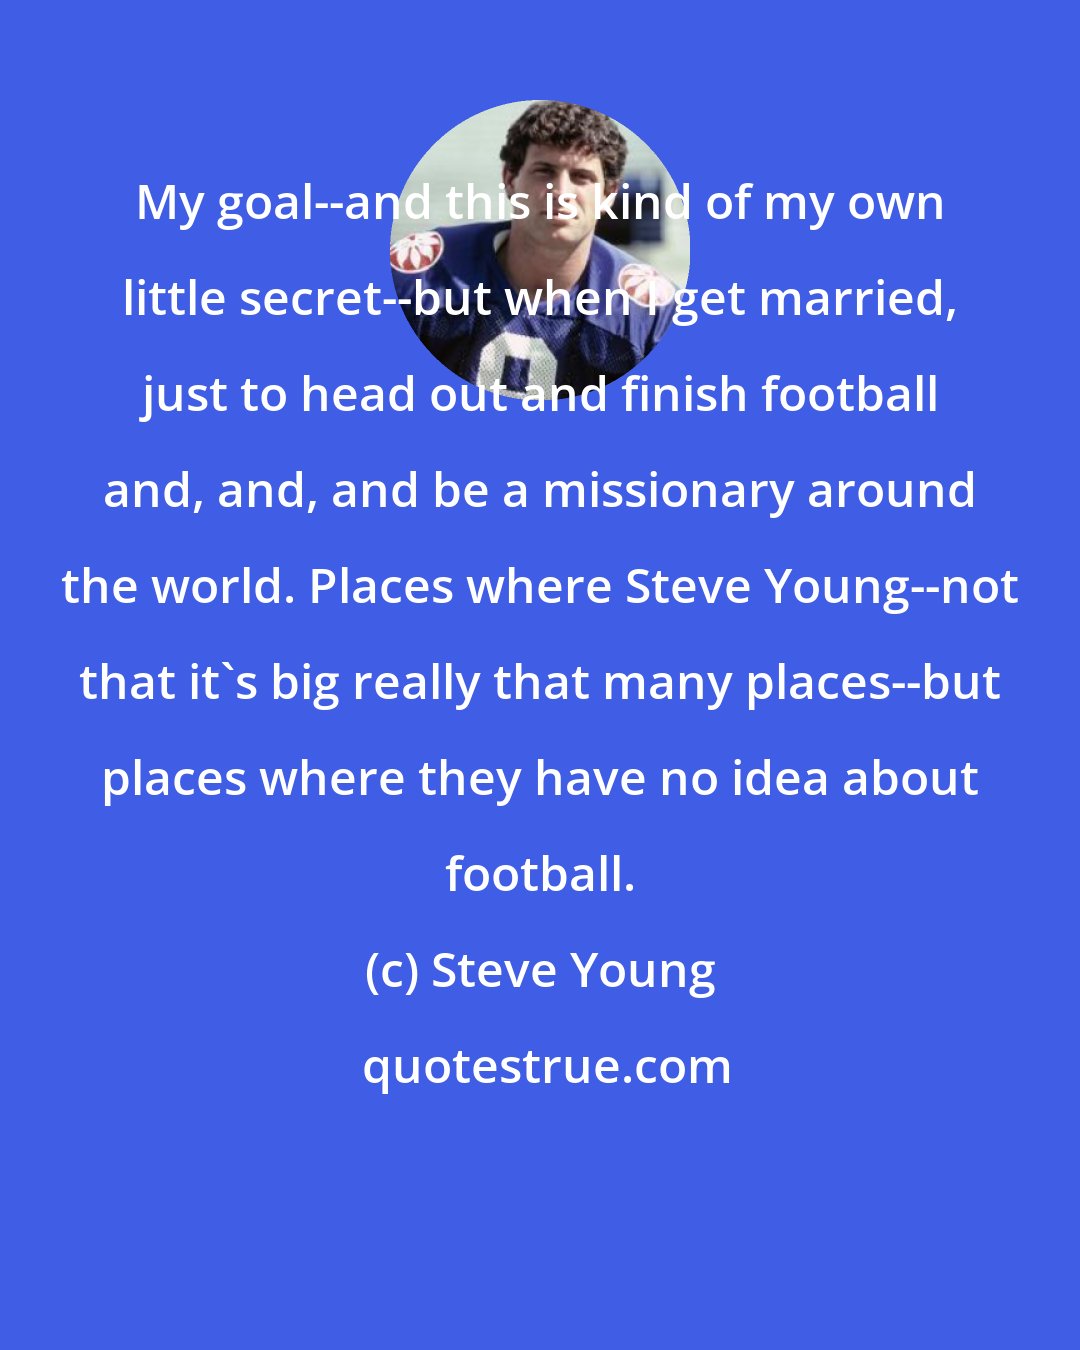 Steve Young: My goal--and this is kind of my own little secret--but when I get married, just to head out and finish football and, and, and be a missionary around the world. Places where Steve Young--not that it's big really that many places--but places where they have no idea about football.